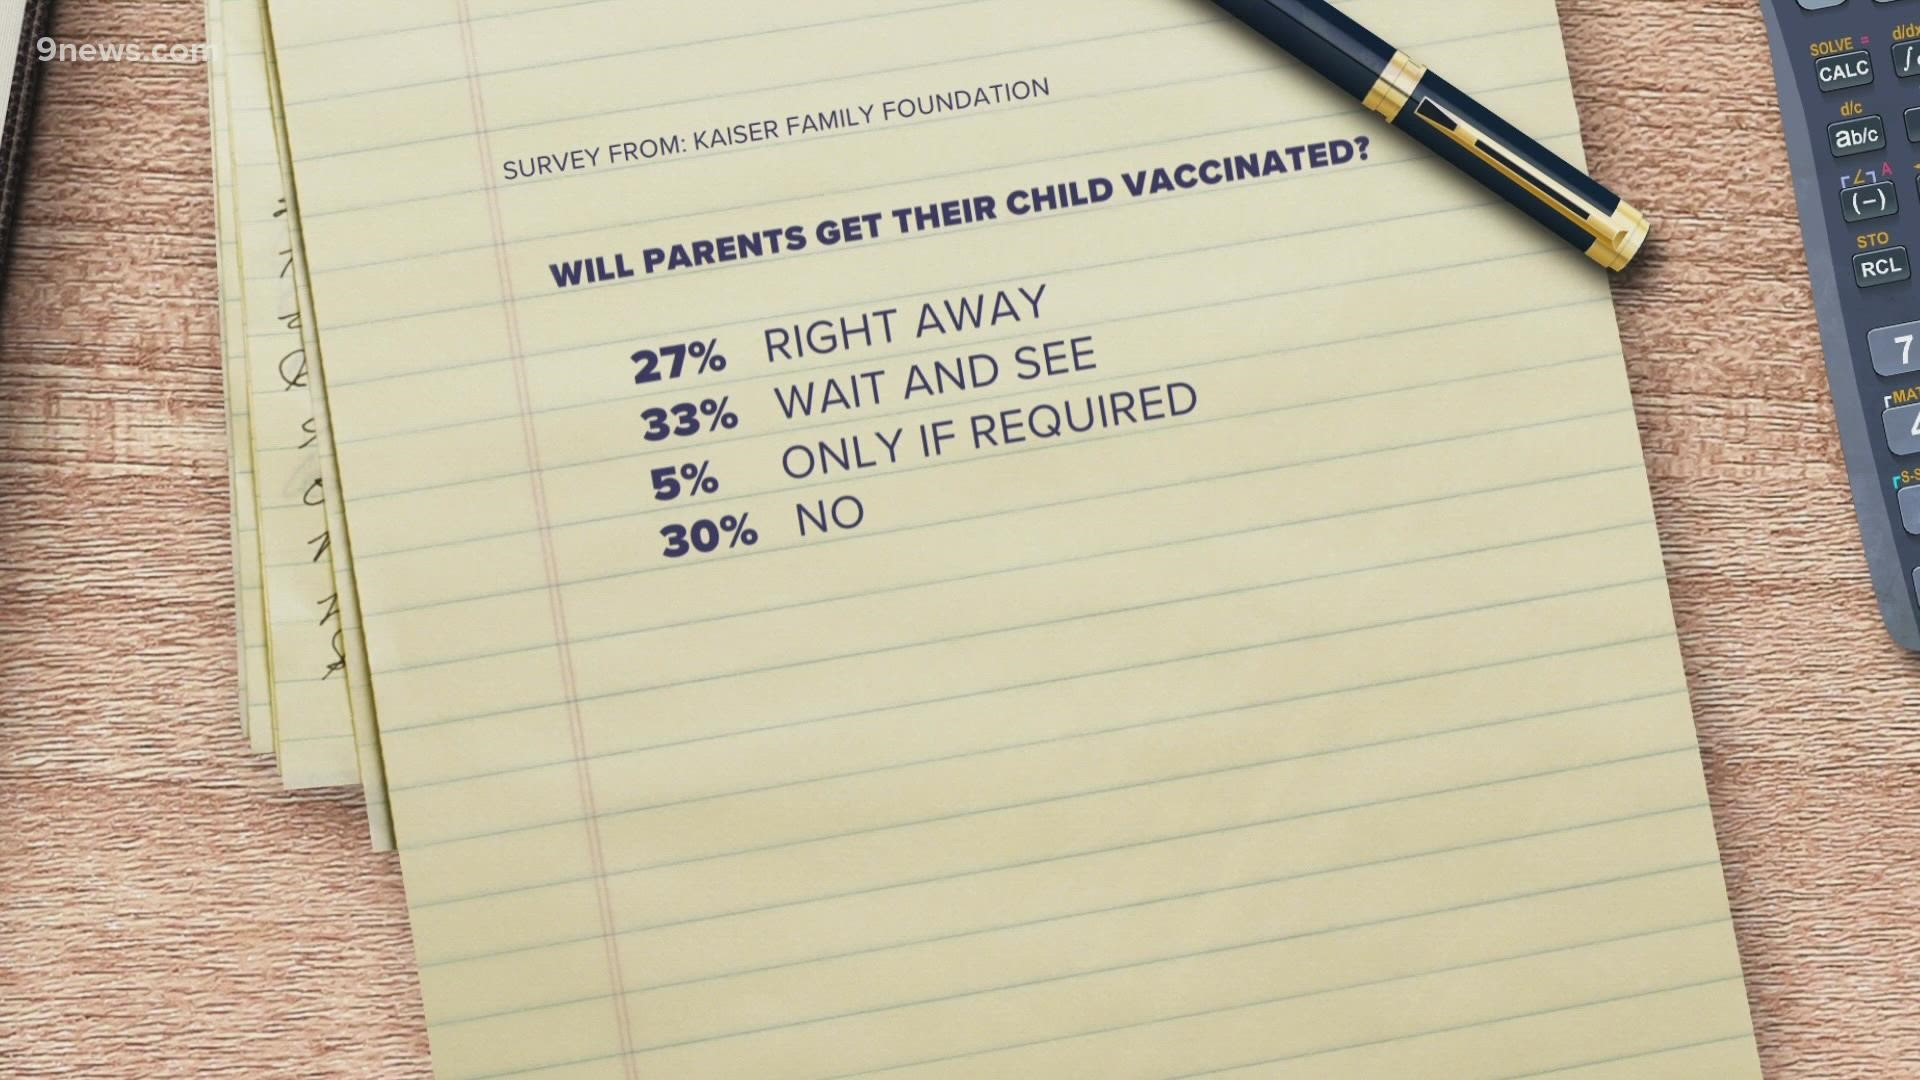 Parents of kids ages 5 – 11 have numerous reasons why they won’t get their kids vaccinated. A medical expert responds to those concerns based on a survey.